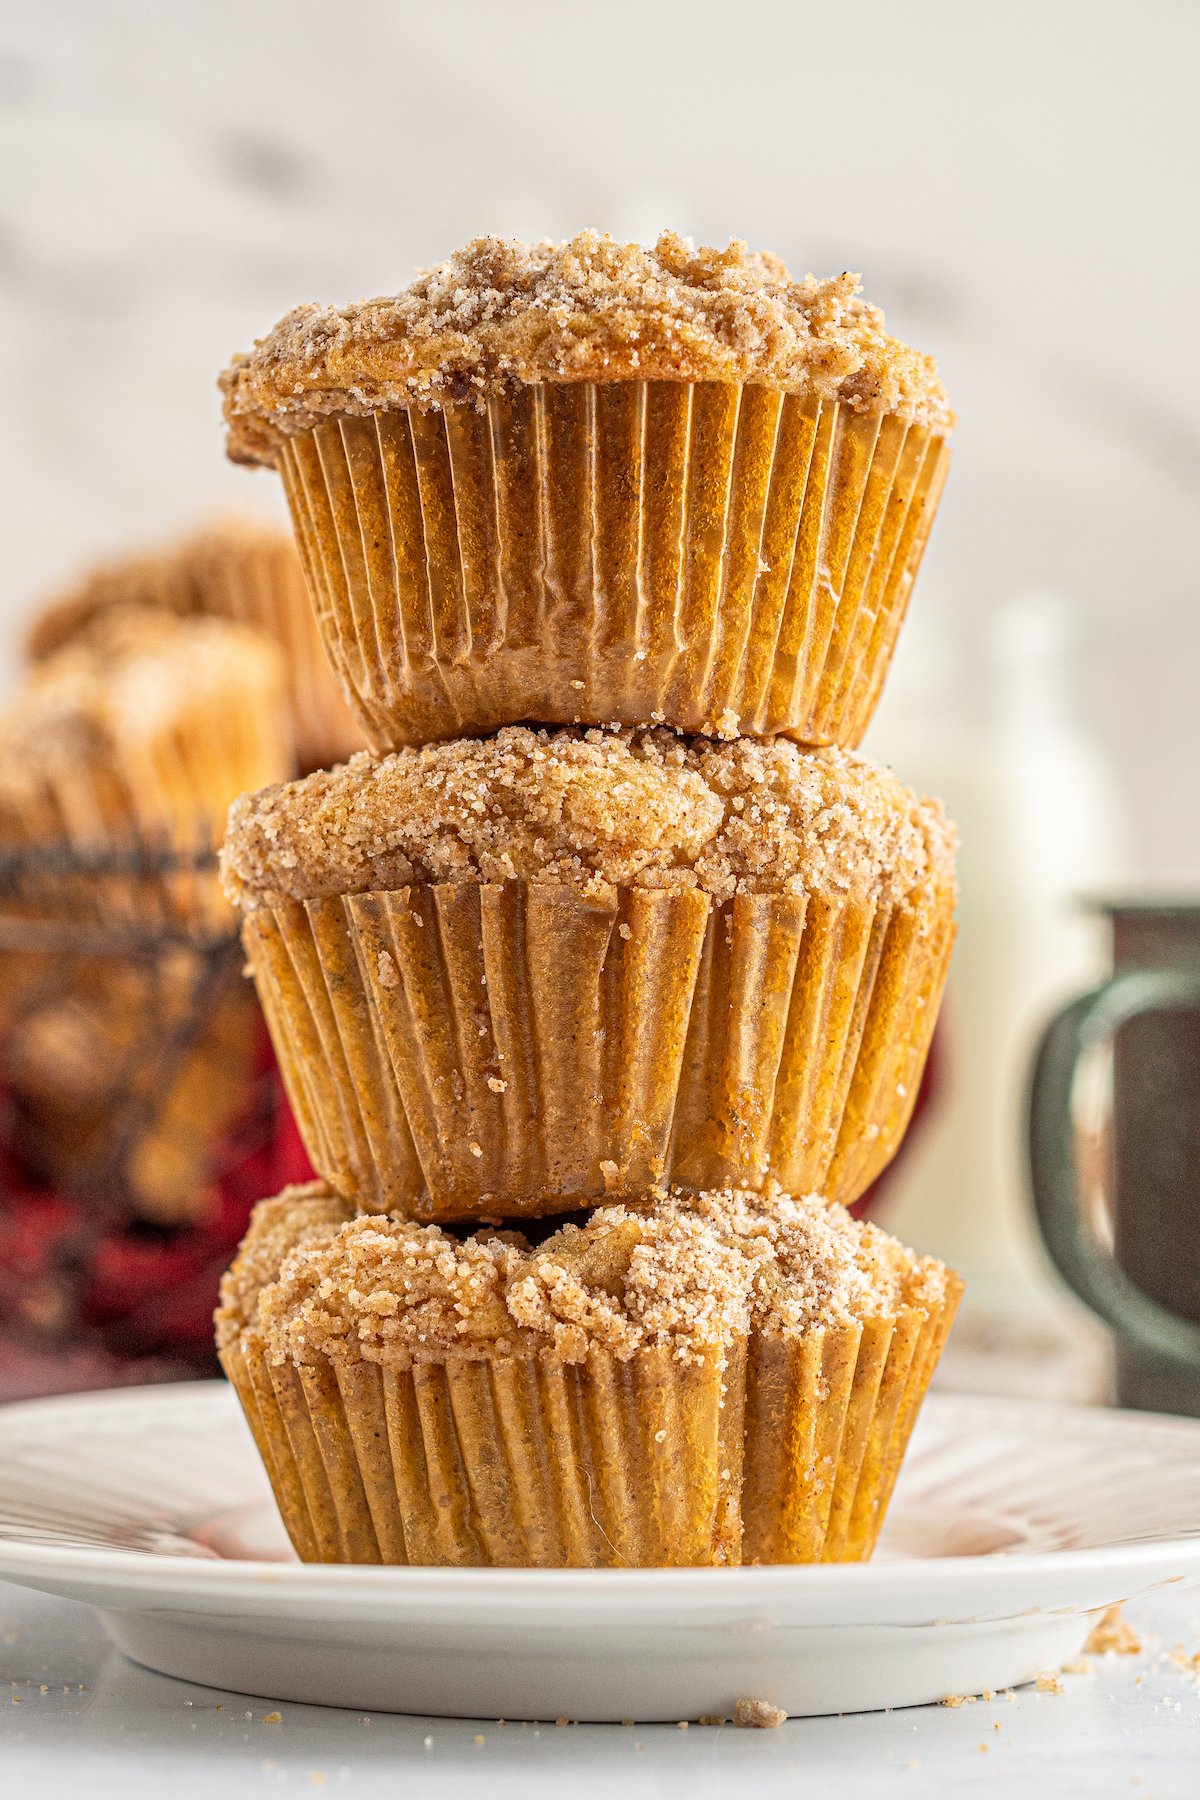 Three apple cinnamon muffins stacked on top of each other on a small plate.